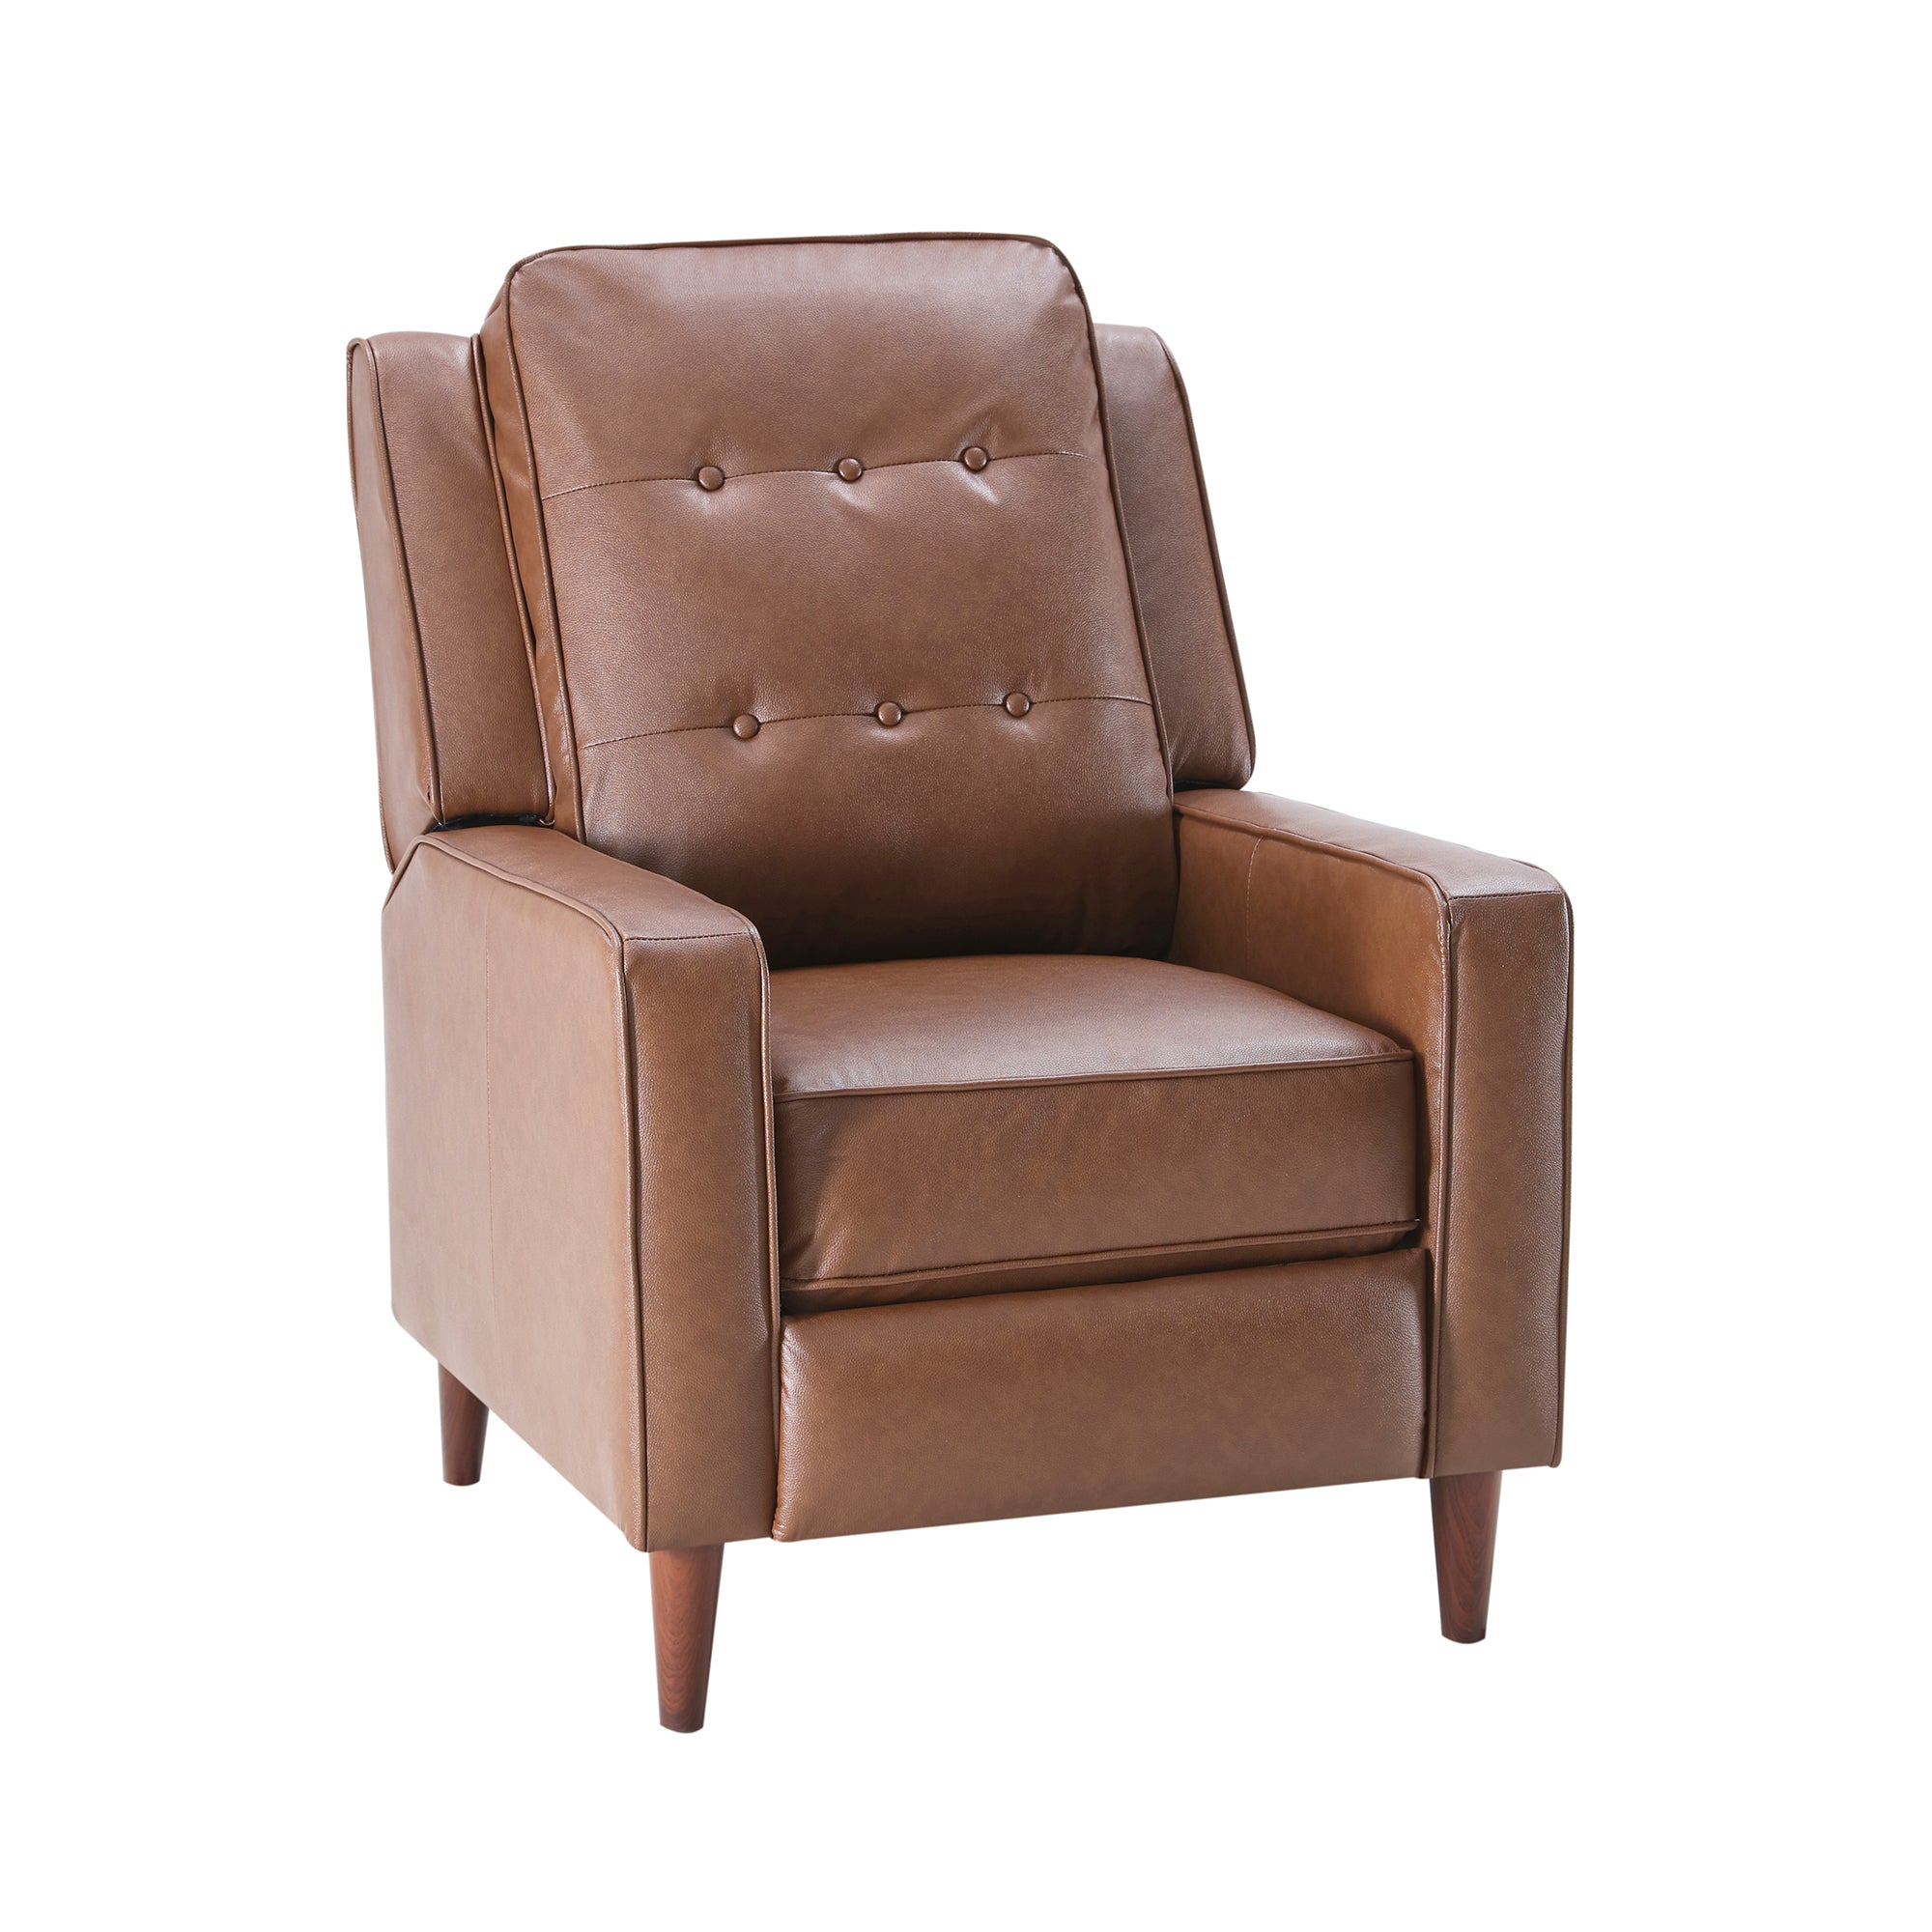 Push Back Recliner Manual Armchair with Medieval style Accent Chair for Living Room, Bedroom, Home Office-Boyel Living